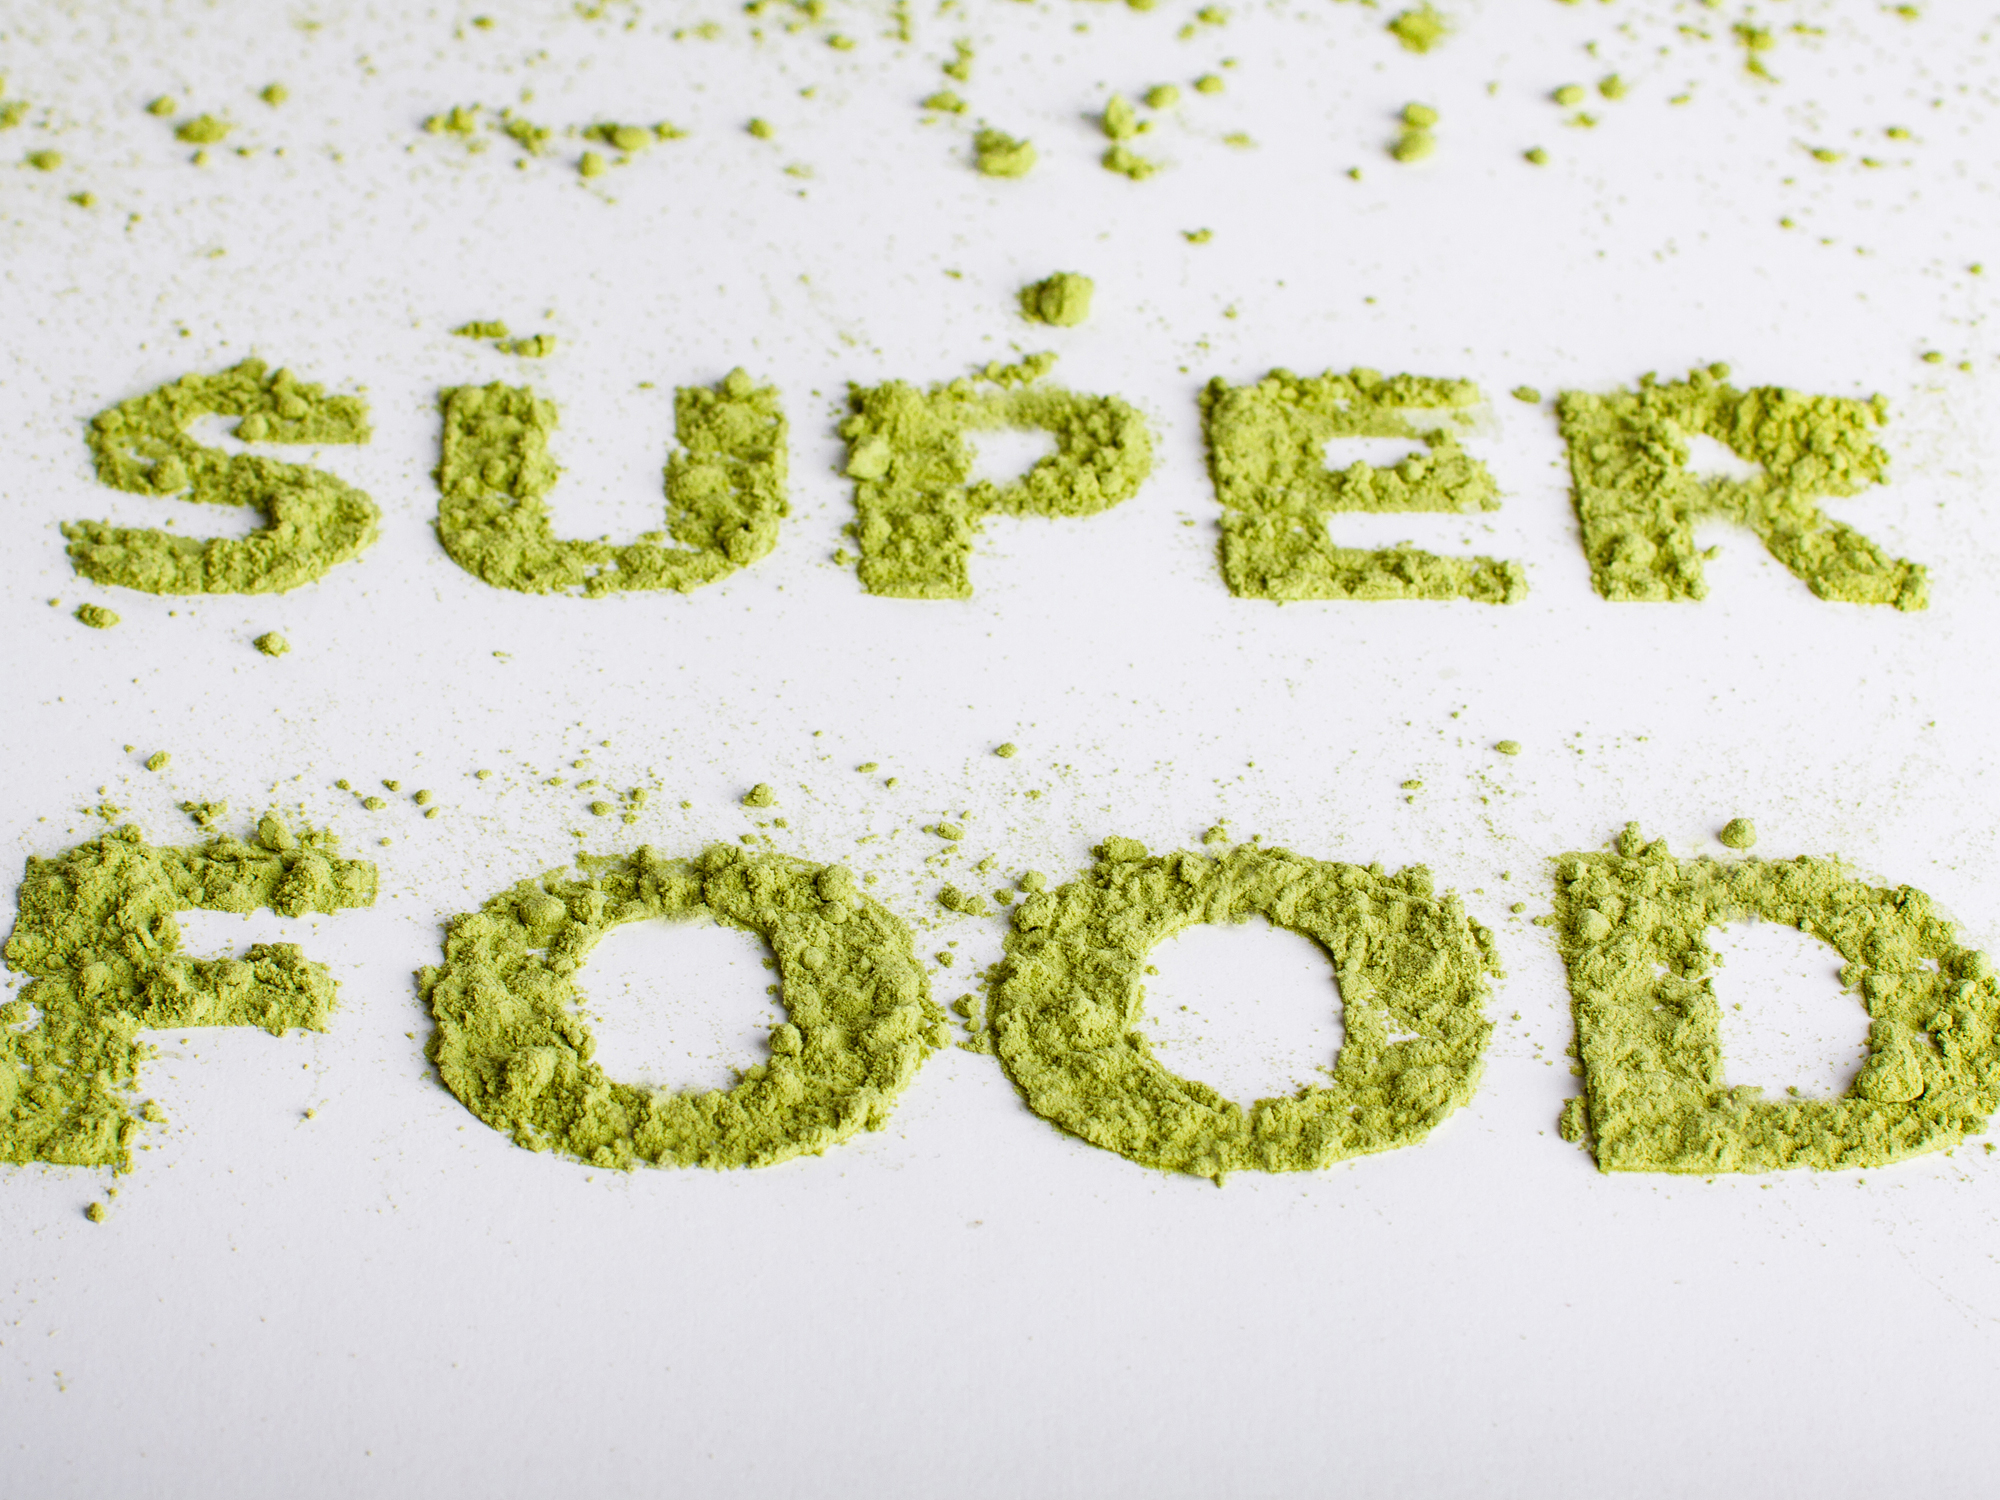 ‘Original’ superfood fights cancer and obesity